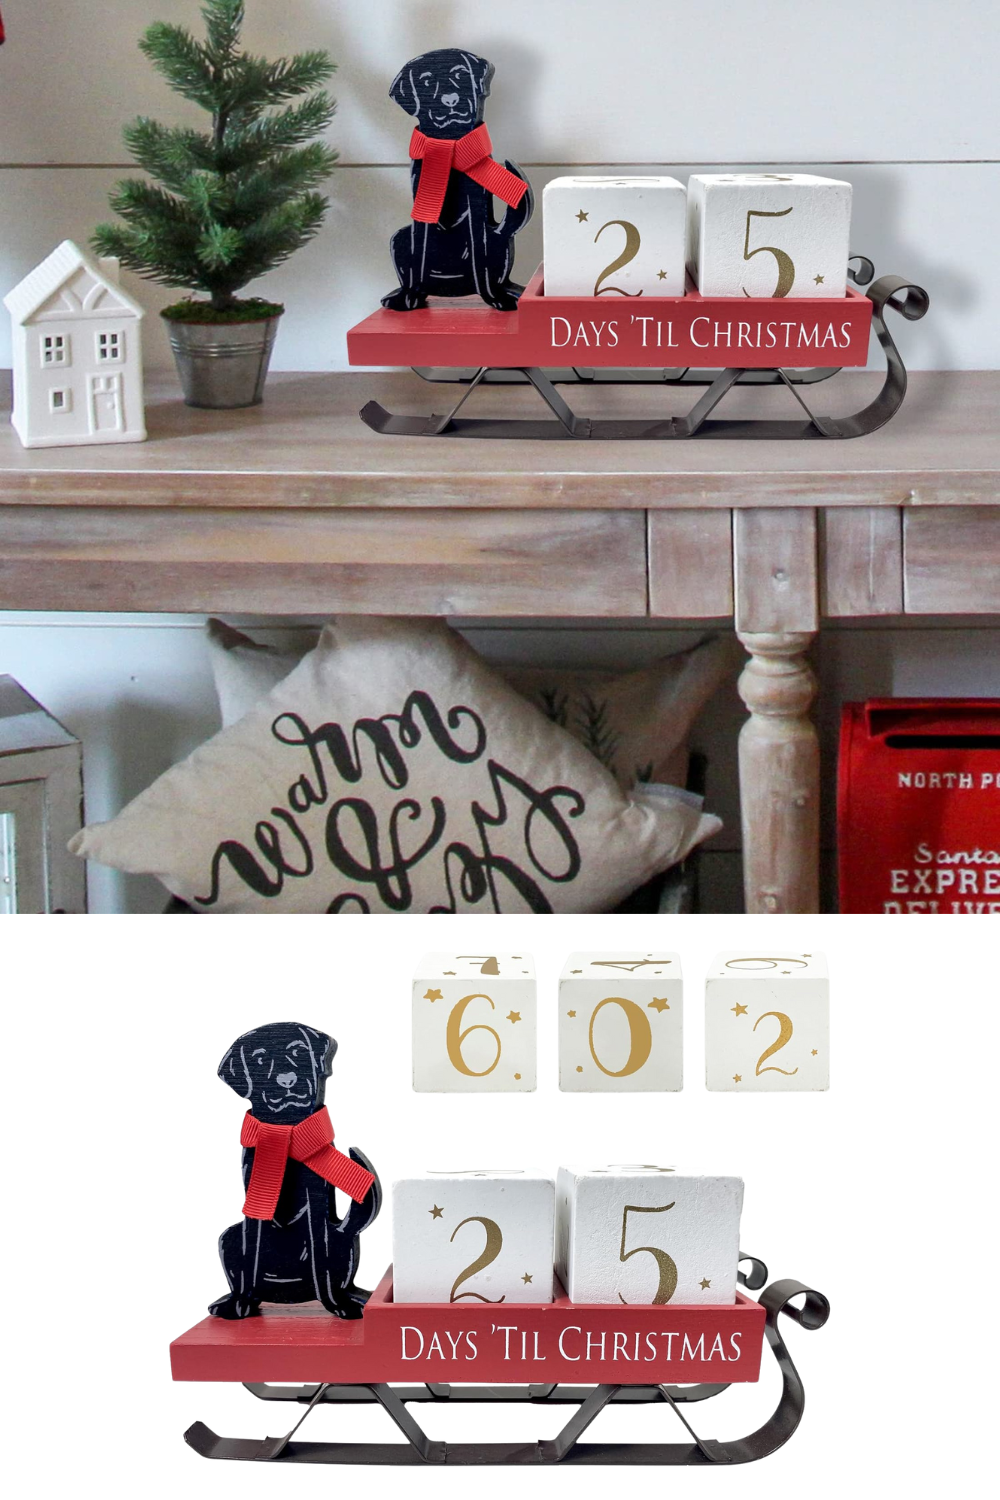 Advent Calendar Christmas Santa Sleigh Countdown 32 Days Until Christmas Block Farmhouse Dog Table Decorations Wooden Winter Rustic Decor Holiday Sign for Home Kitchen Xmas Party Mantel